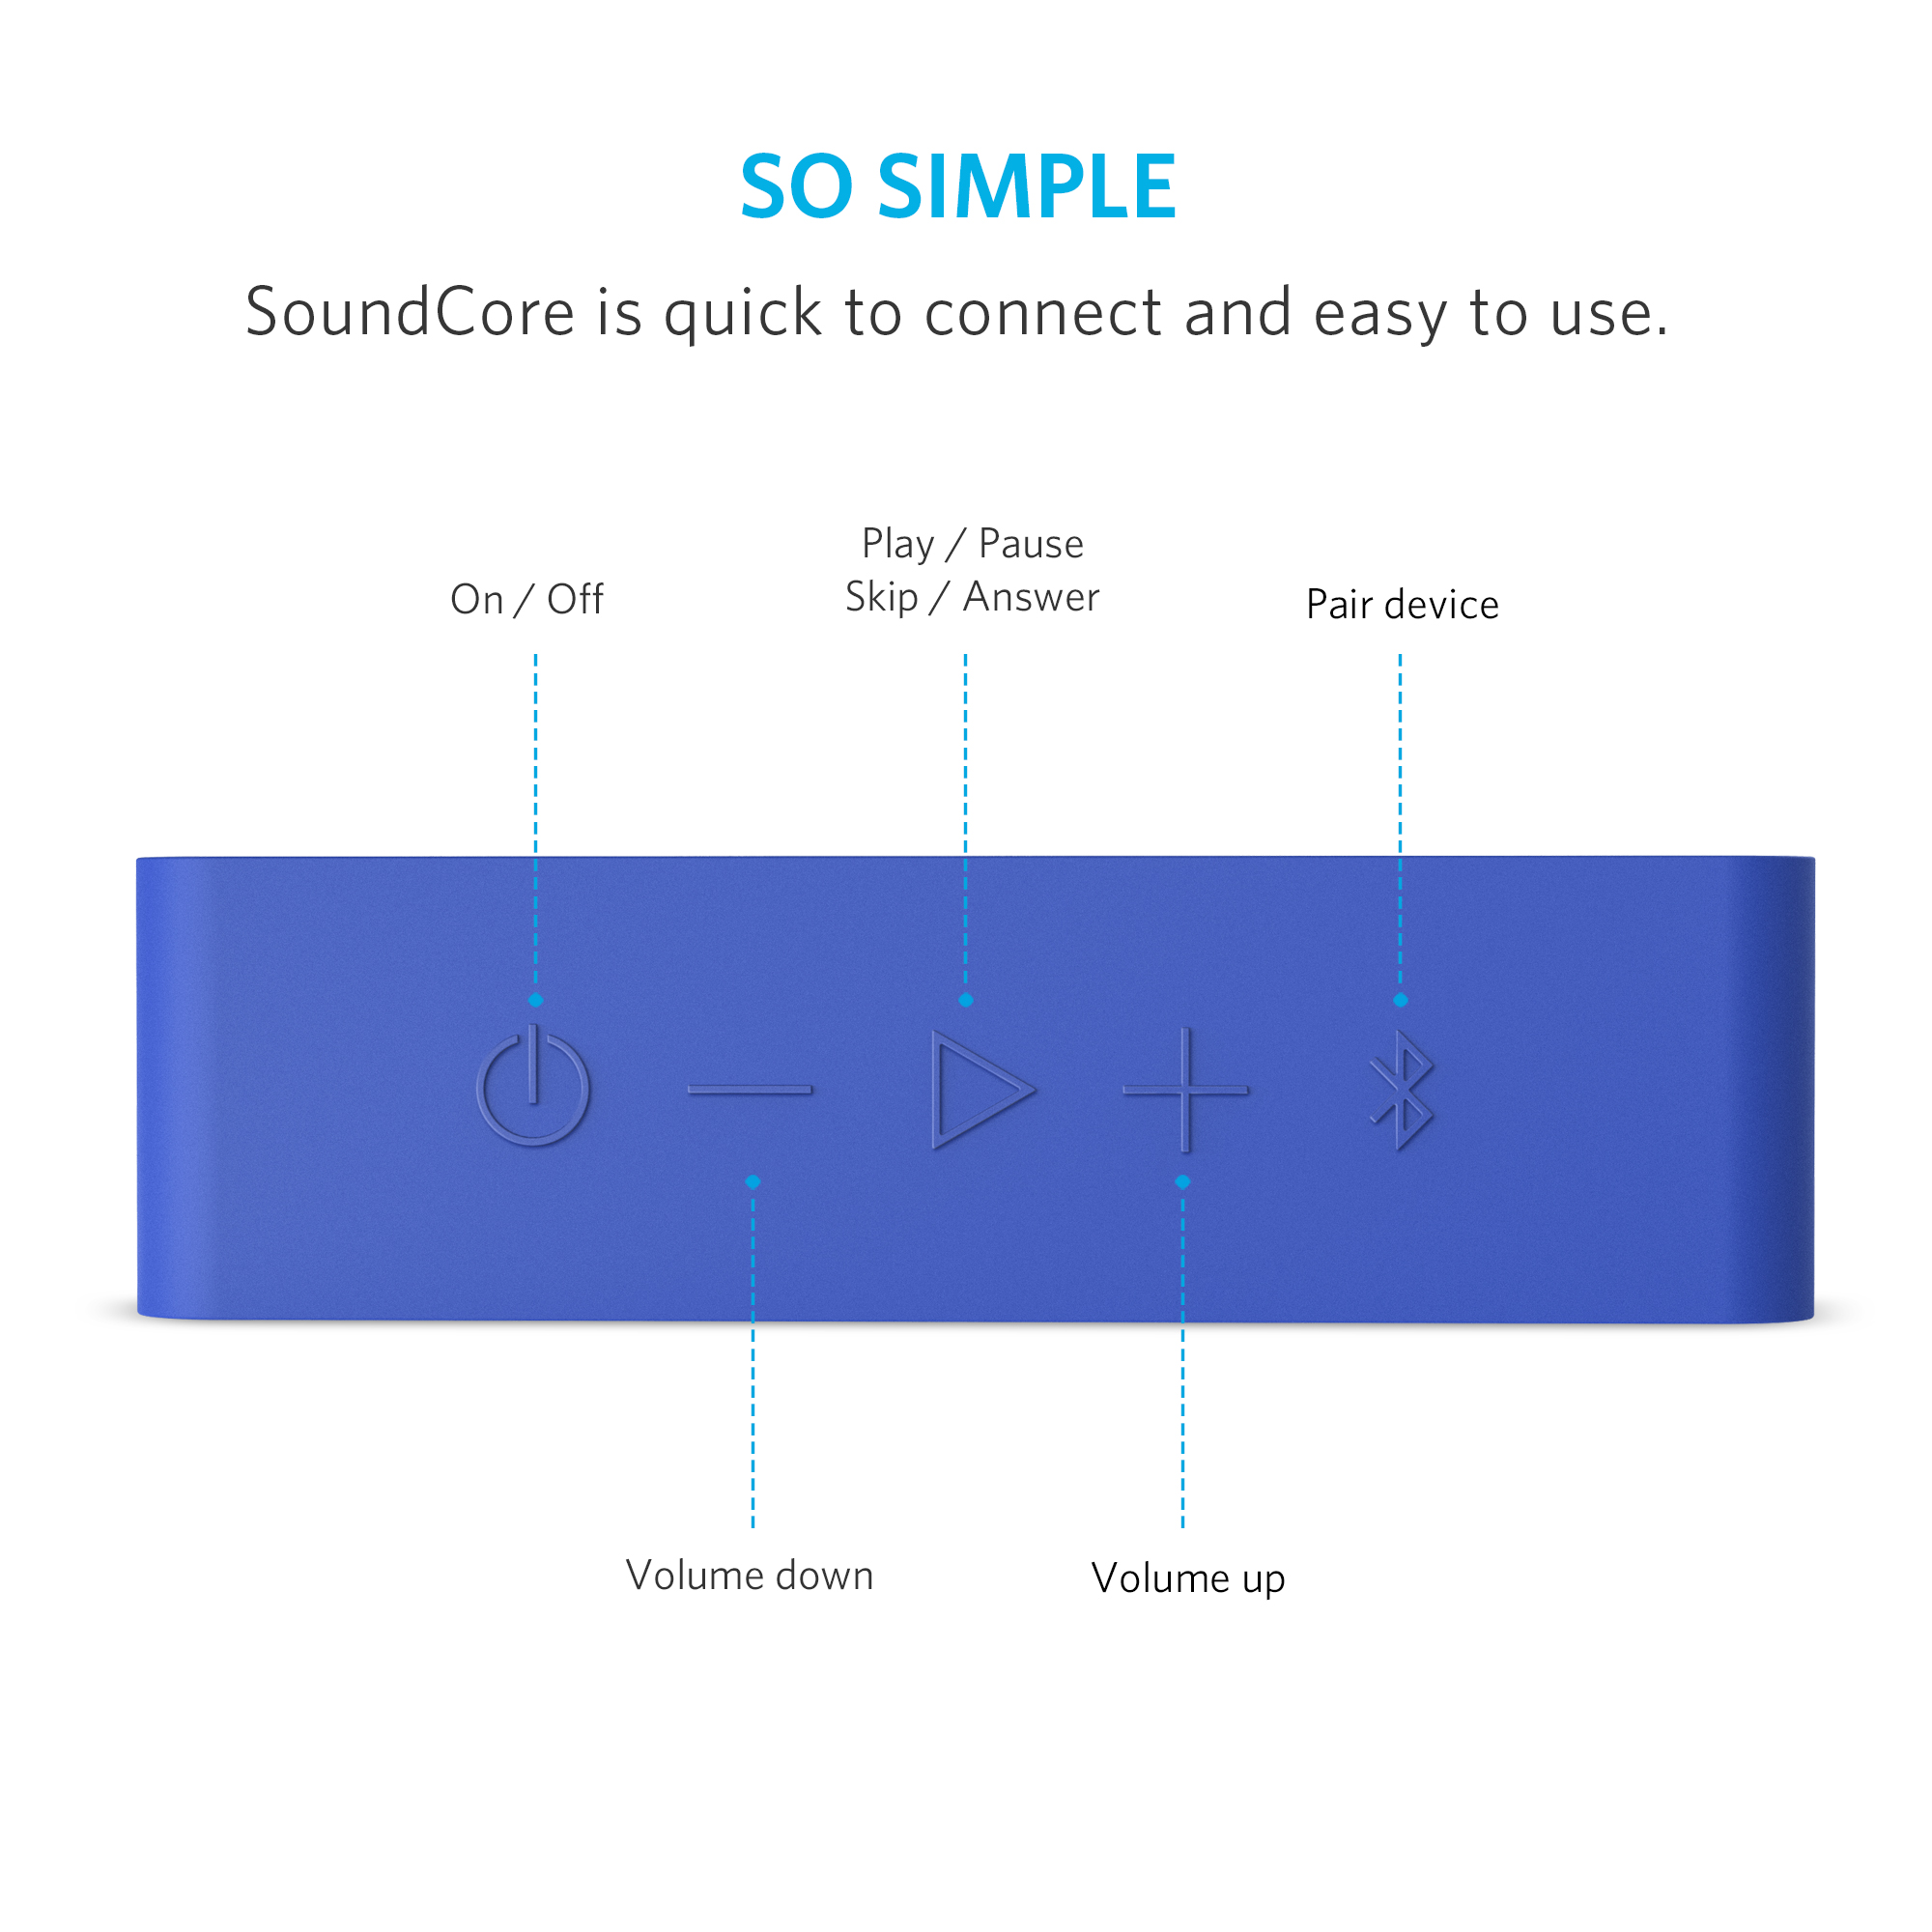 Anker Soundcore Bluetooth Speaker with 24-Hour Playtime, 66-Feet Bluetooth Range & Built-in Mic, Dual-Driver Portable Wireless Speaker with Low Harmonic Distortion and Superior Sound - Blue Blue Speaker - image 3 of 4